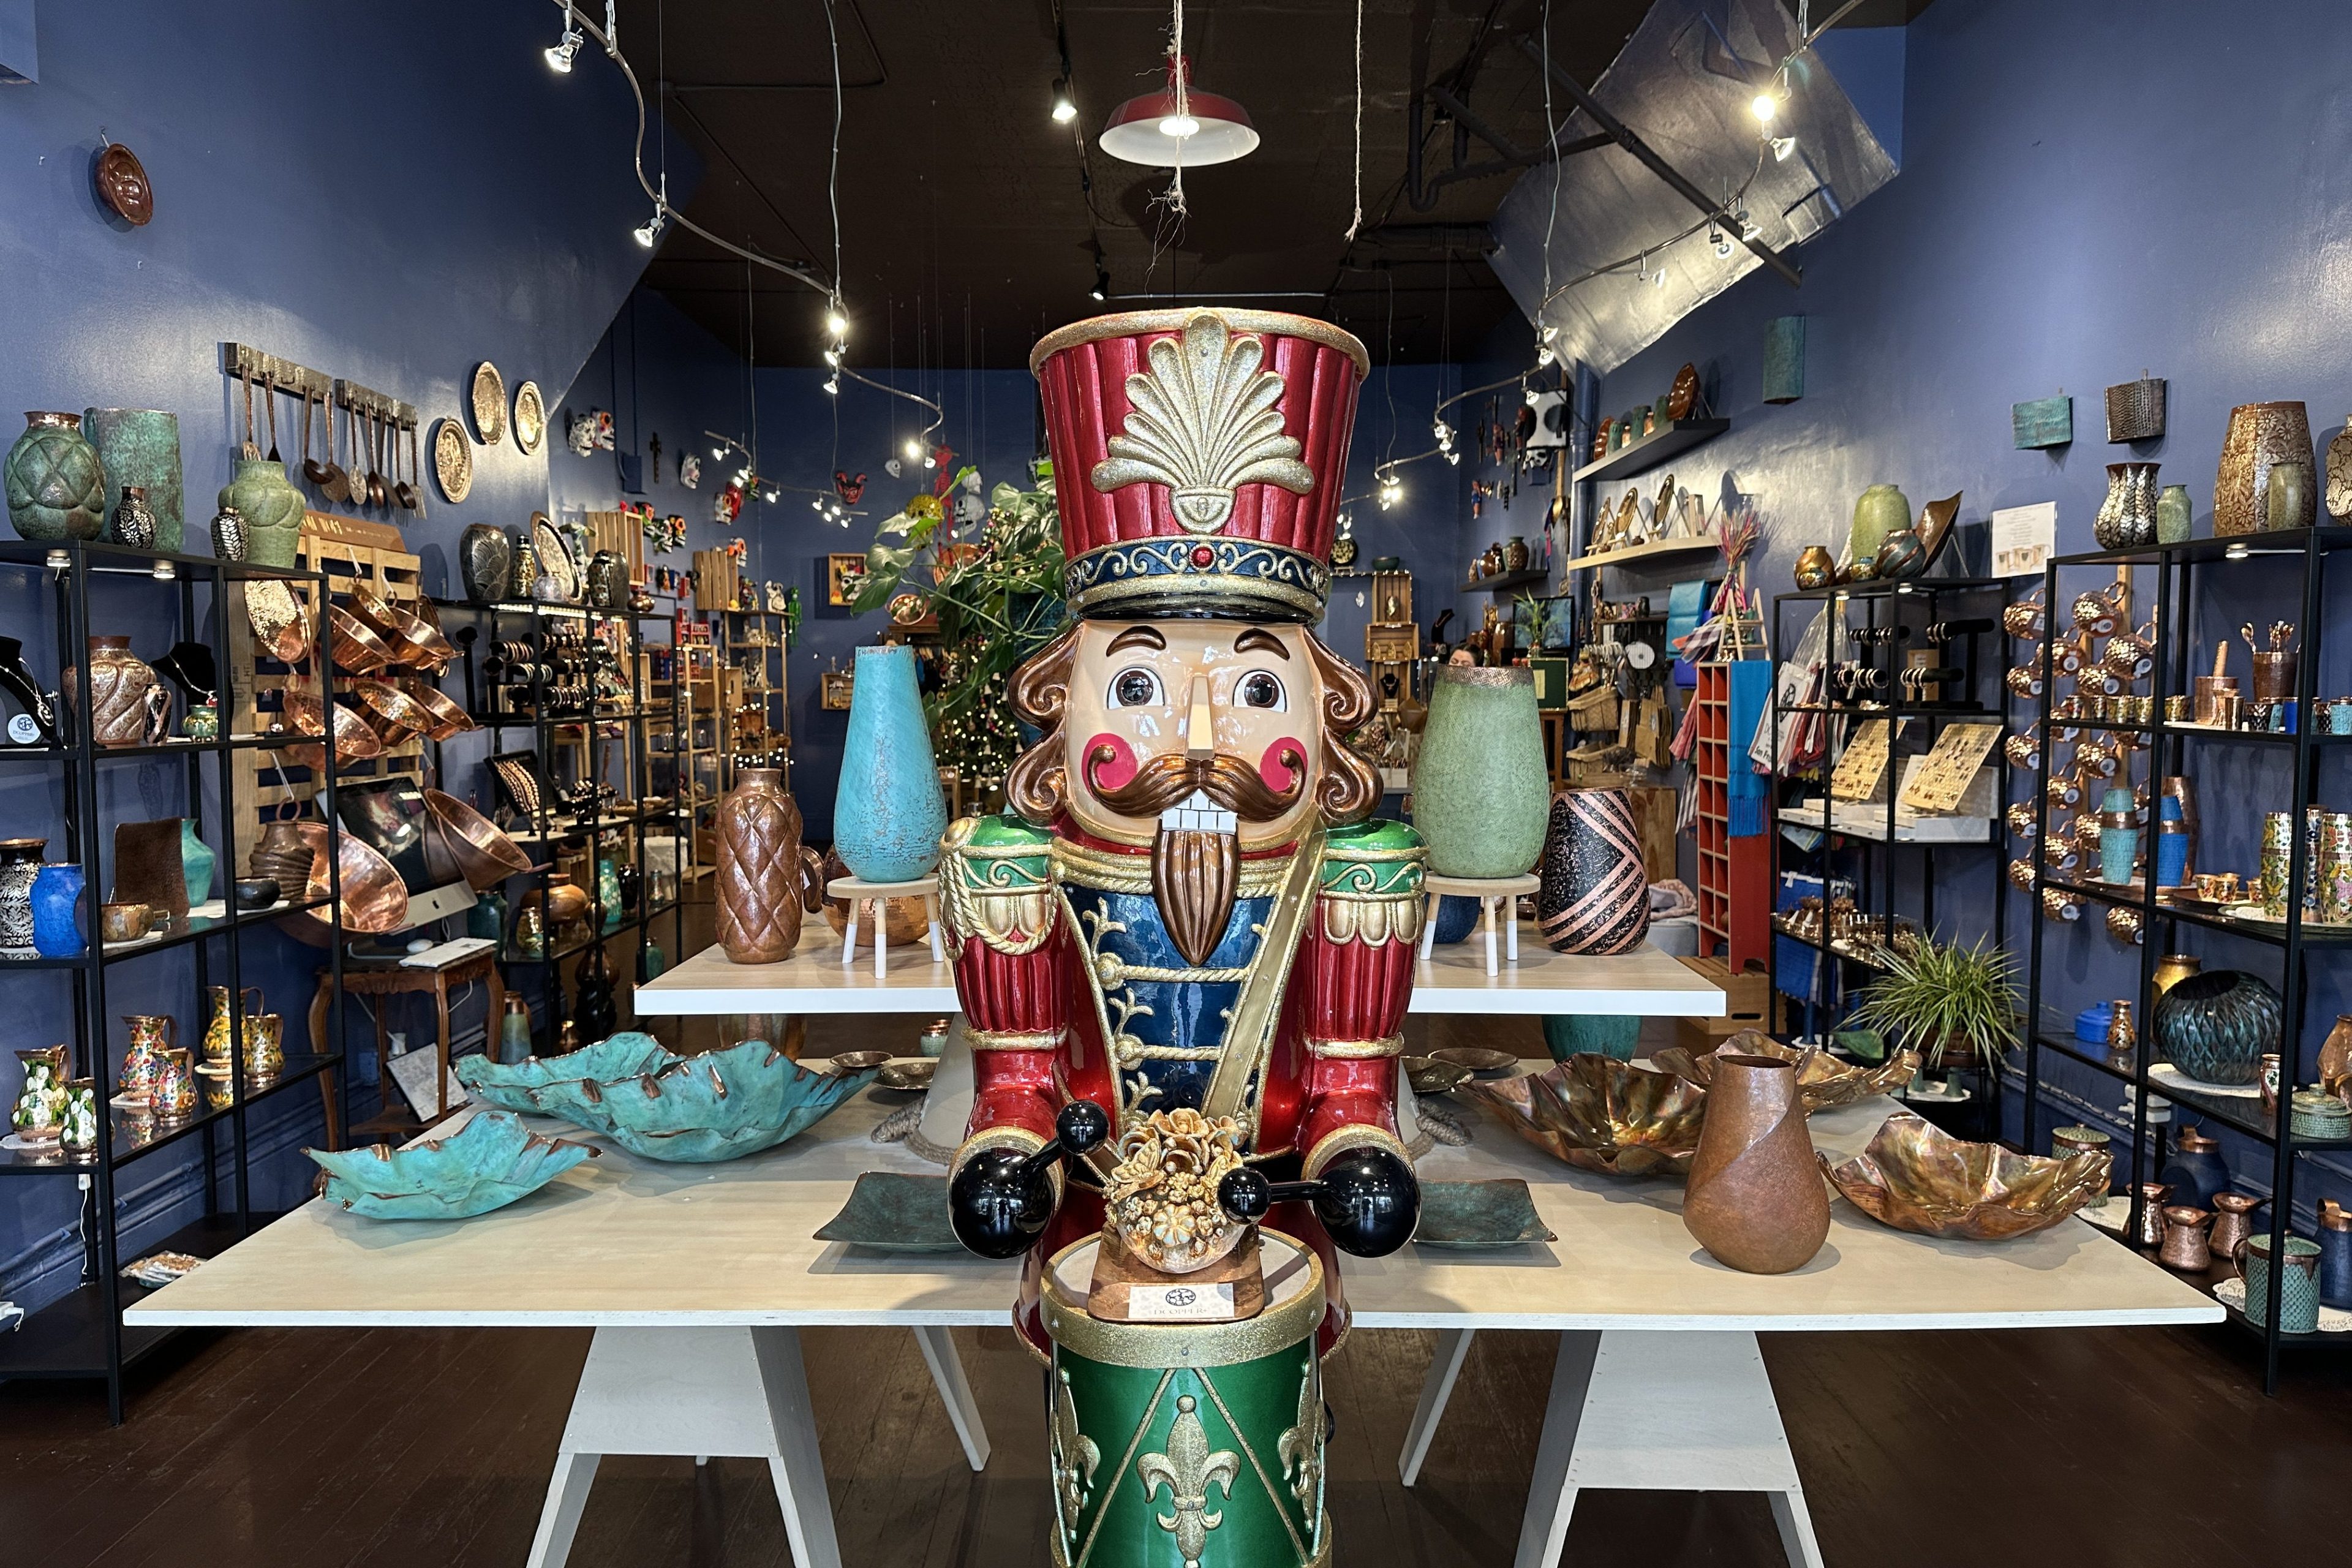 A giant Nutcracker statue stands at the entrance of a shop, which sells artisan-crafted copper vases, bowls and plates from Mexico.